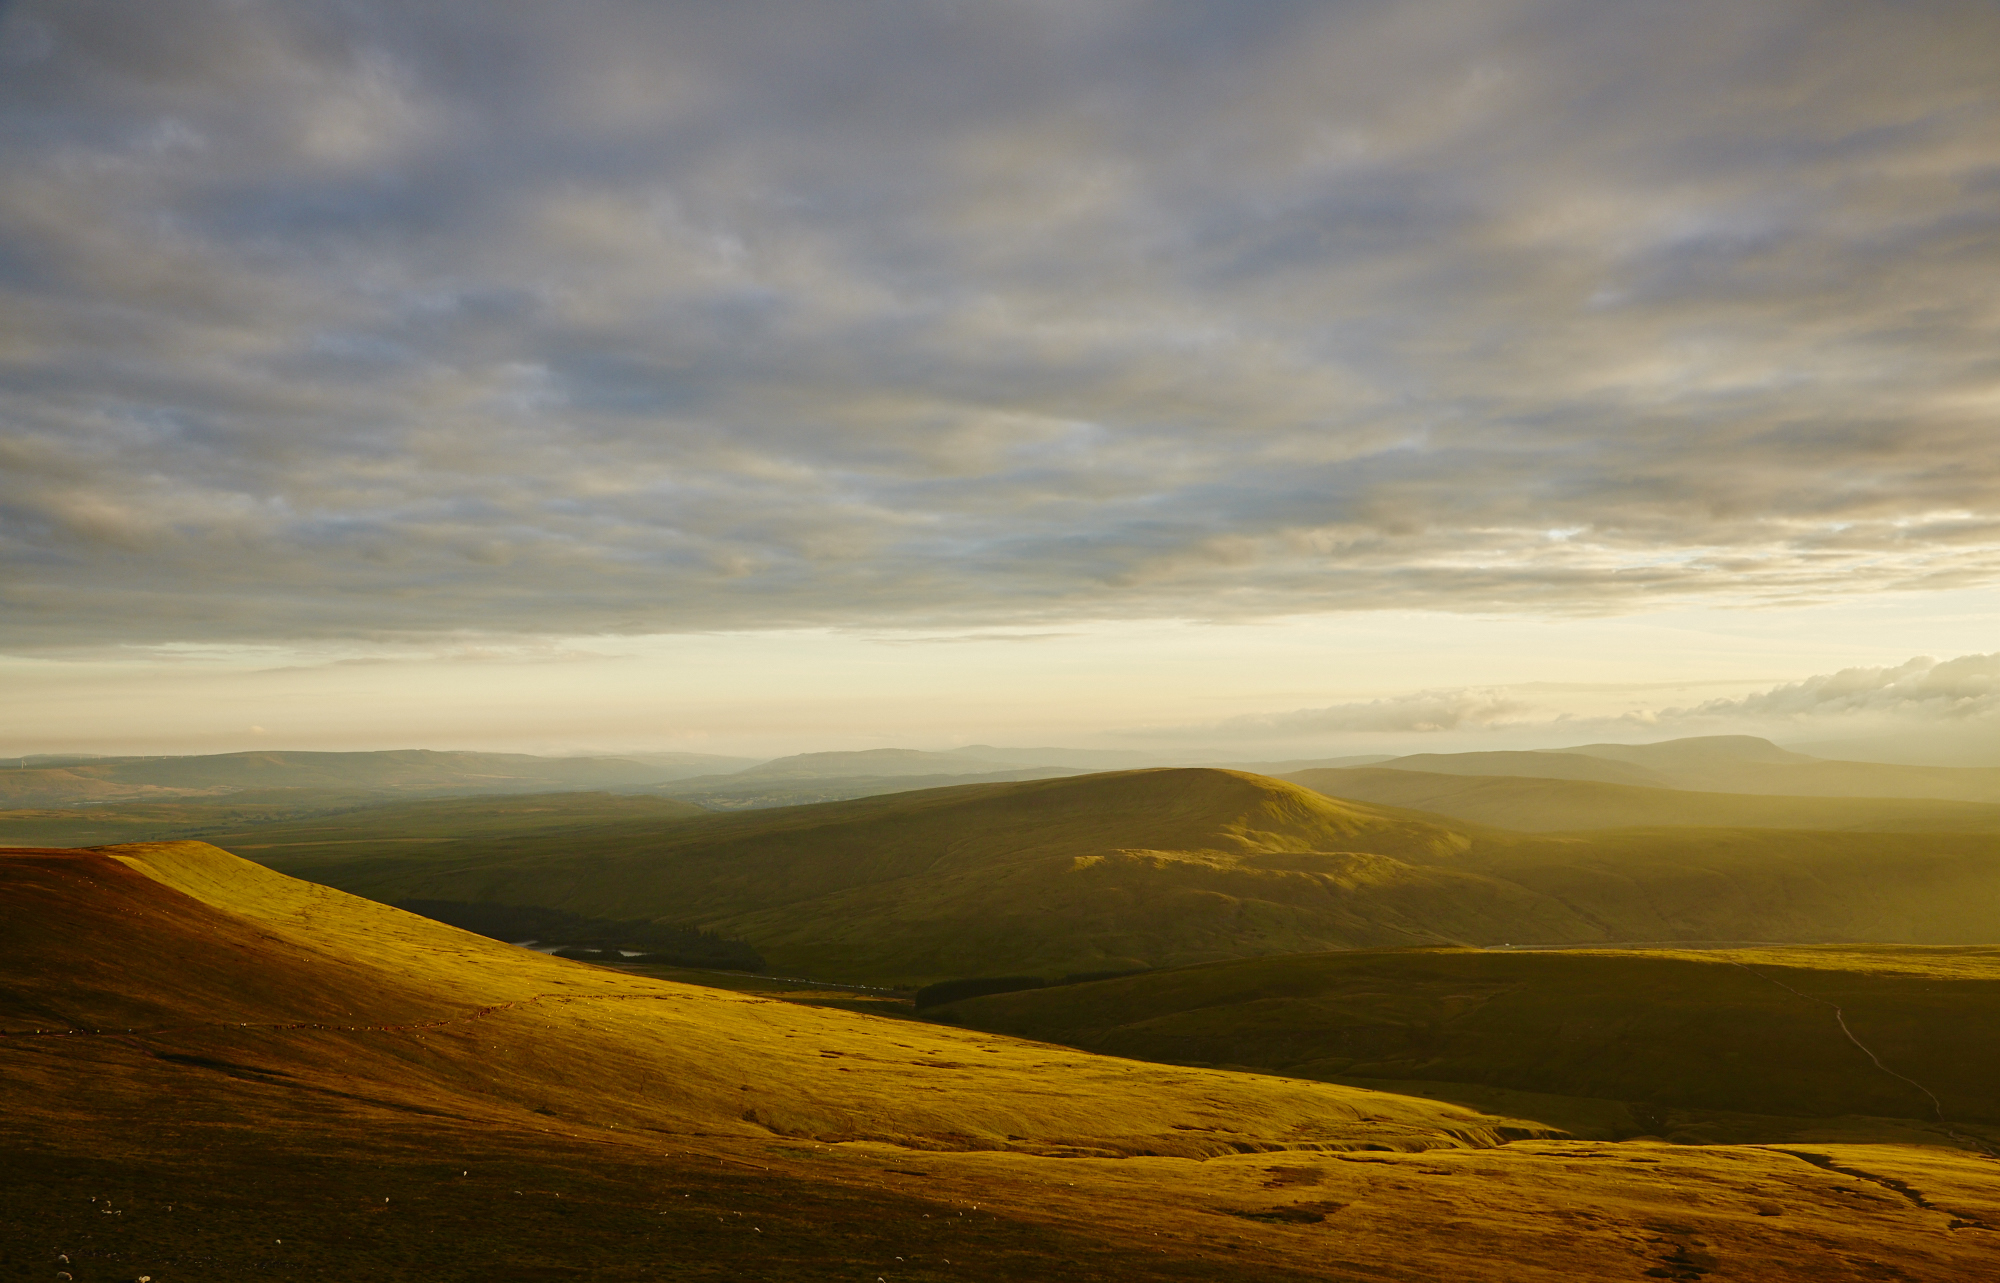 Brecon Beacons, Wales, UK.  Landscape photography by Mike Caldwell